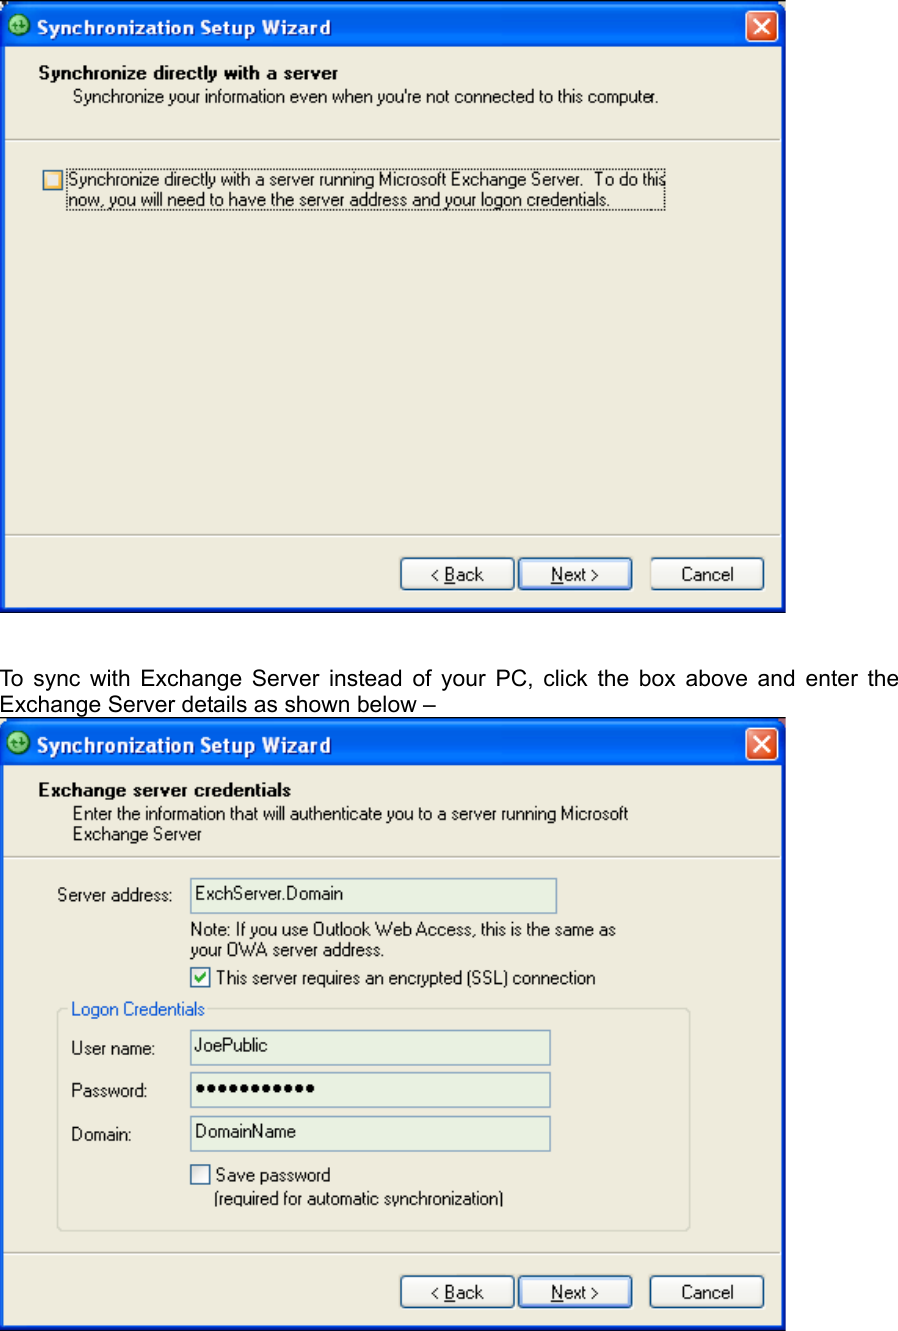    To sync with Exchange Server instead of your PC, click the box above and enter the Exchange Server details as shown below –  